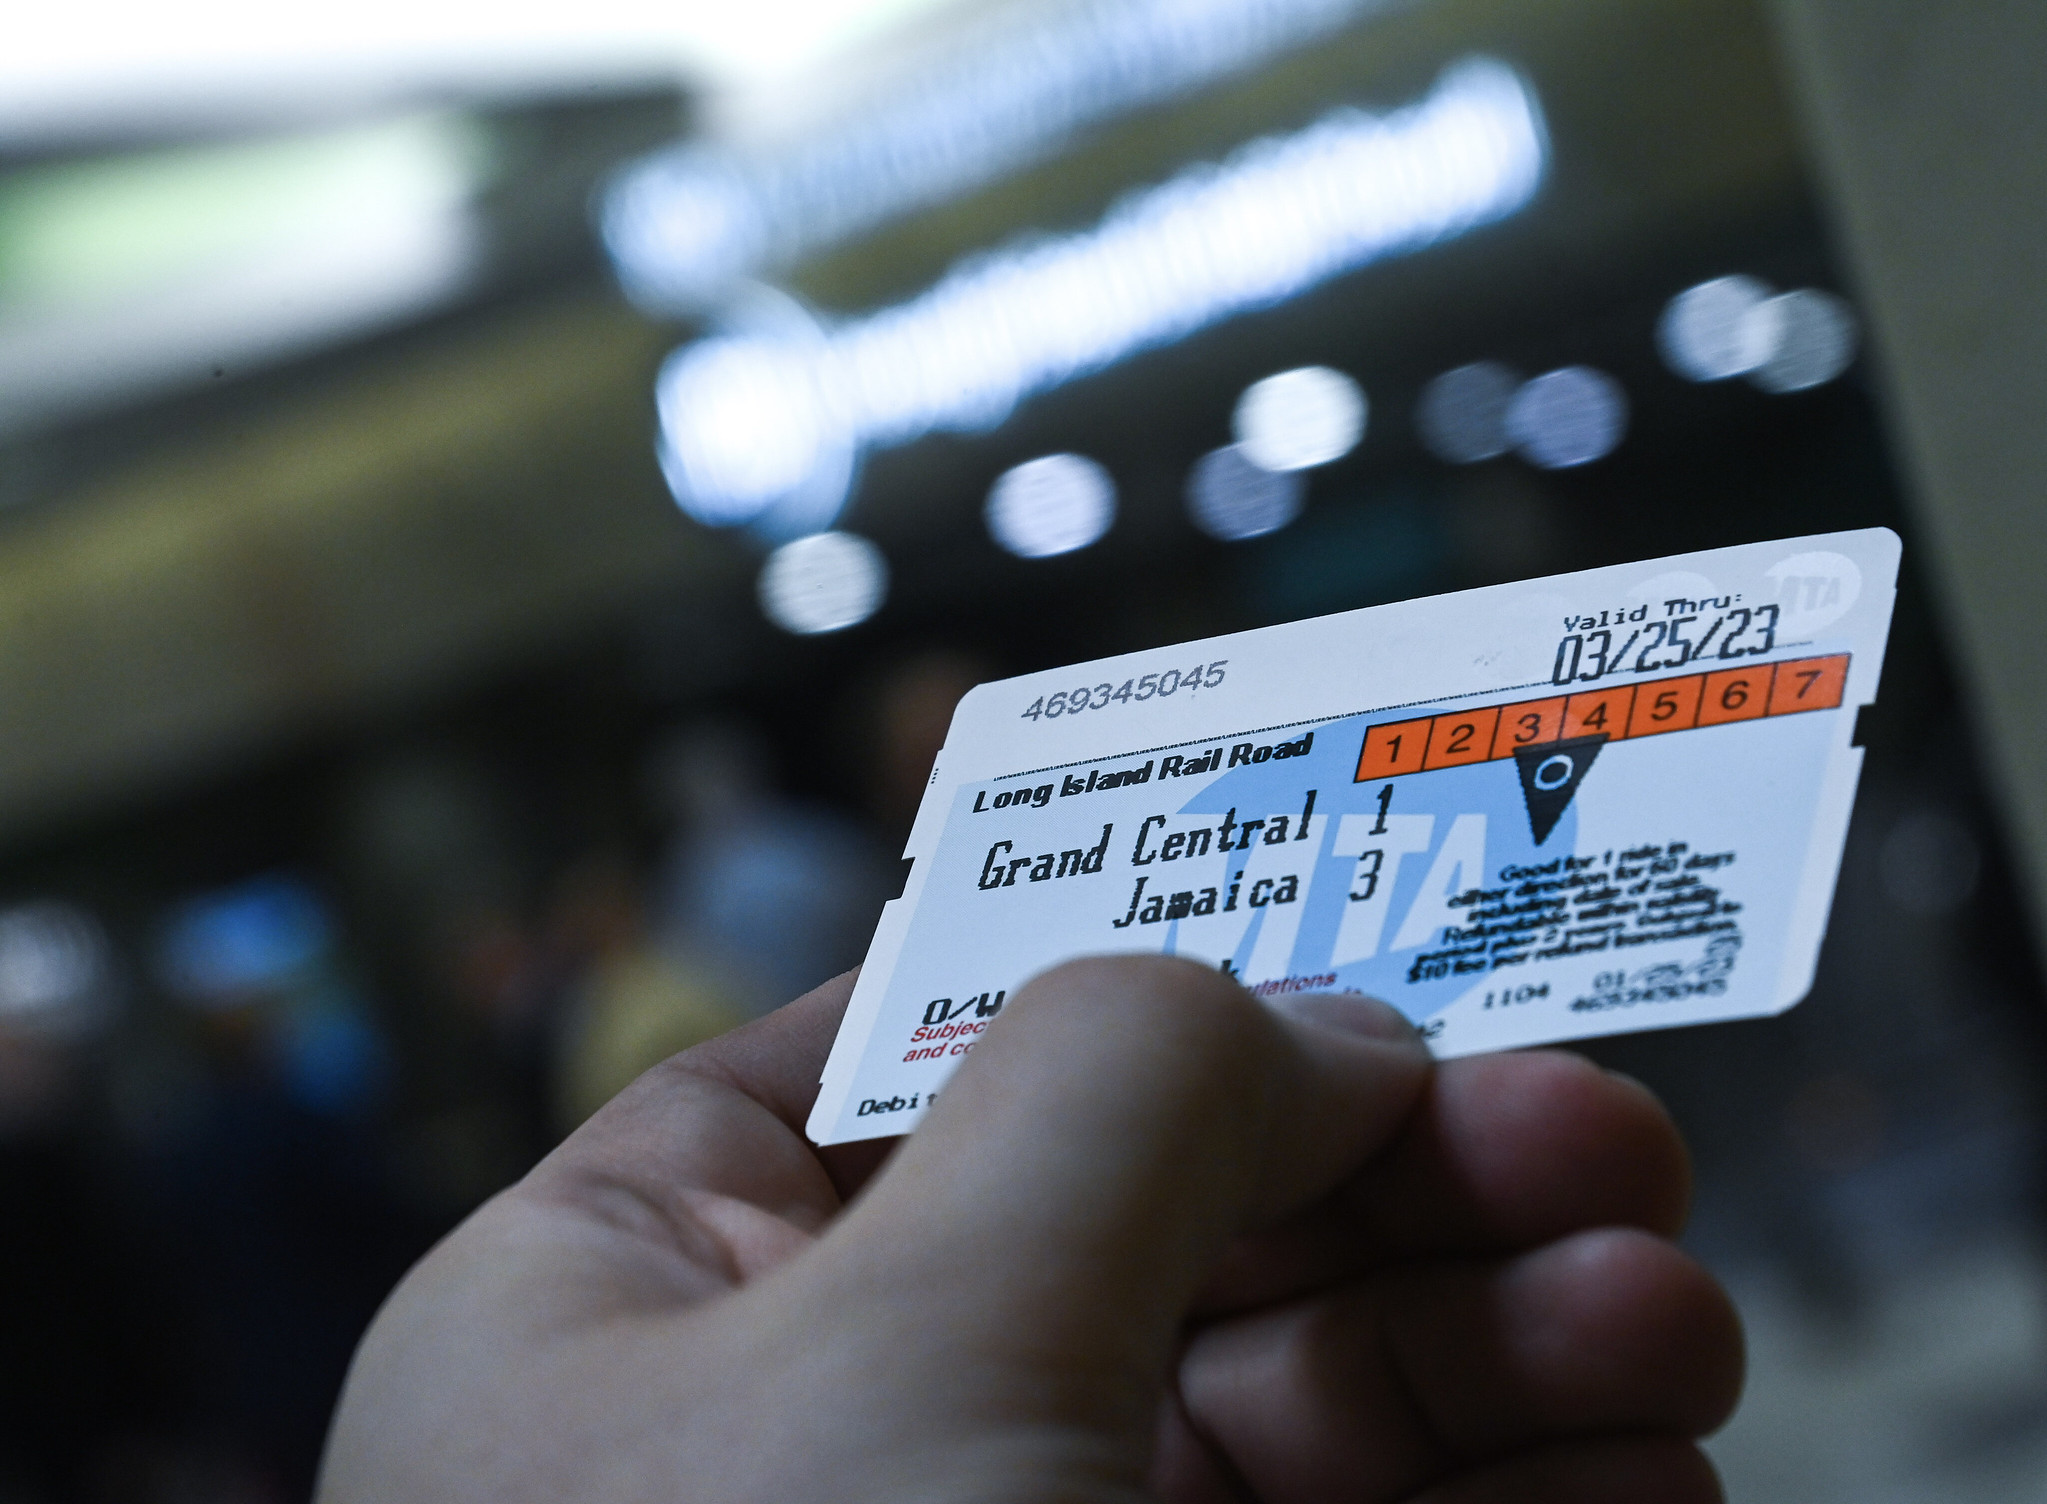 A hand holds a Long Island Rail Road ticket